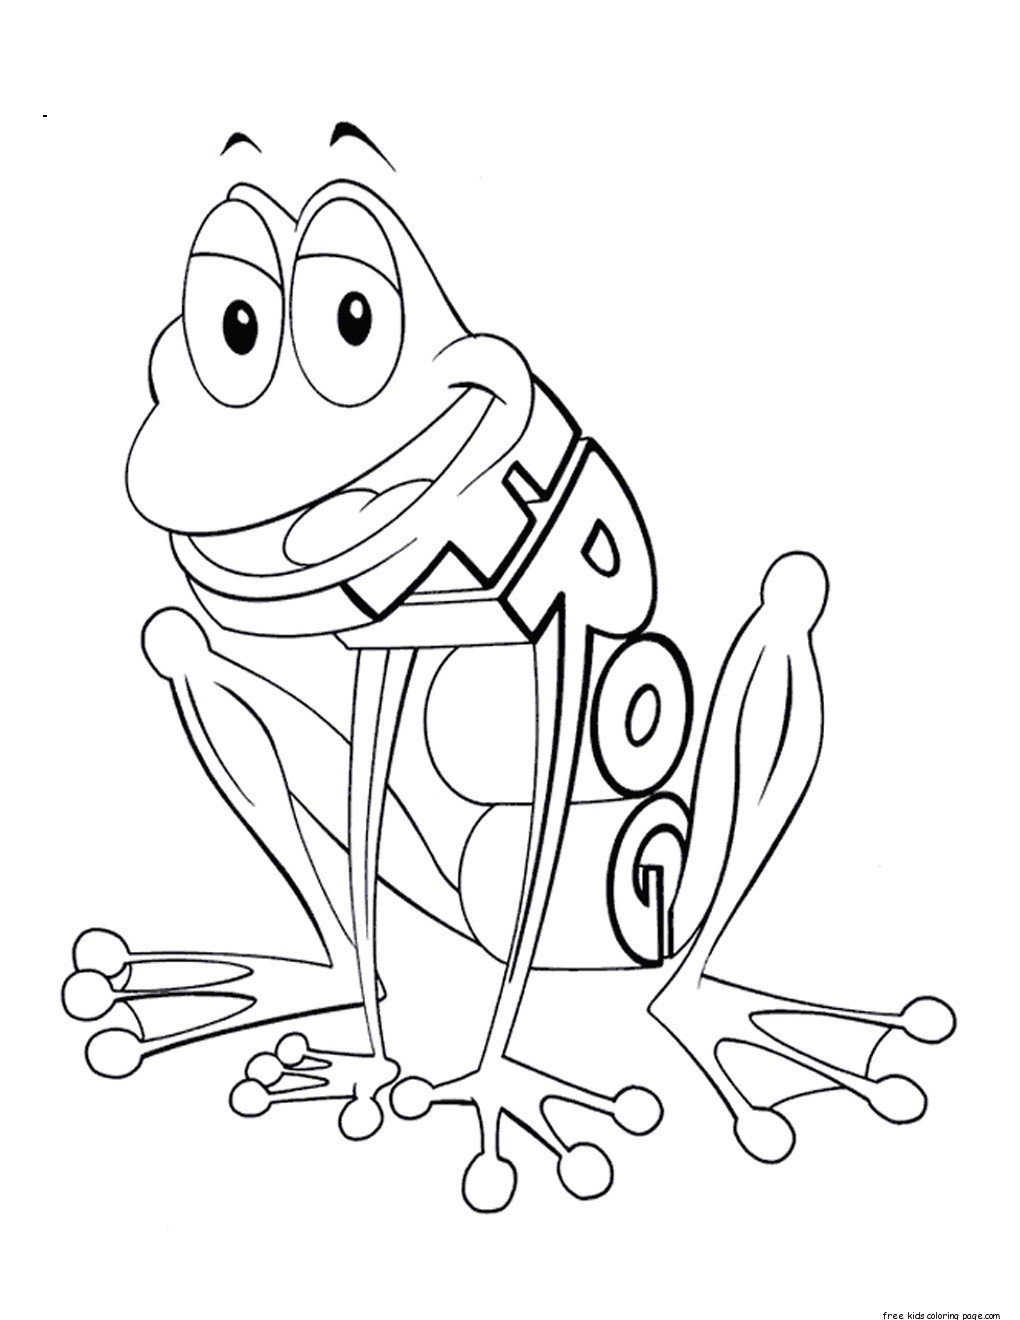 Free Toddler Coloring Pages
 Printable kindergarten alphabet worksheets f for frogFree